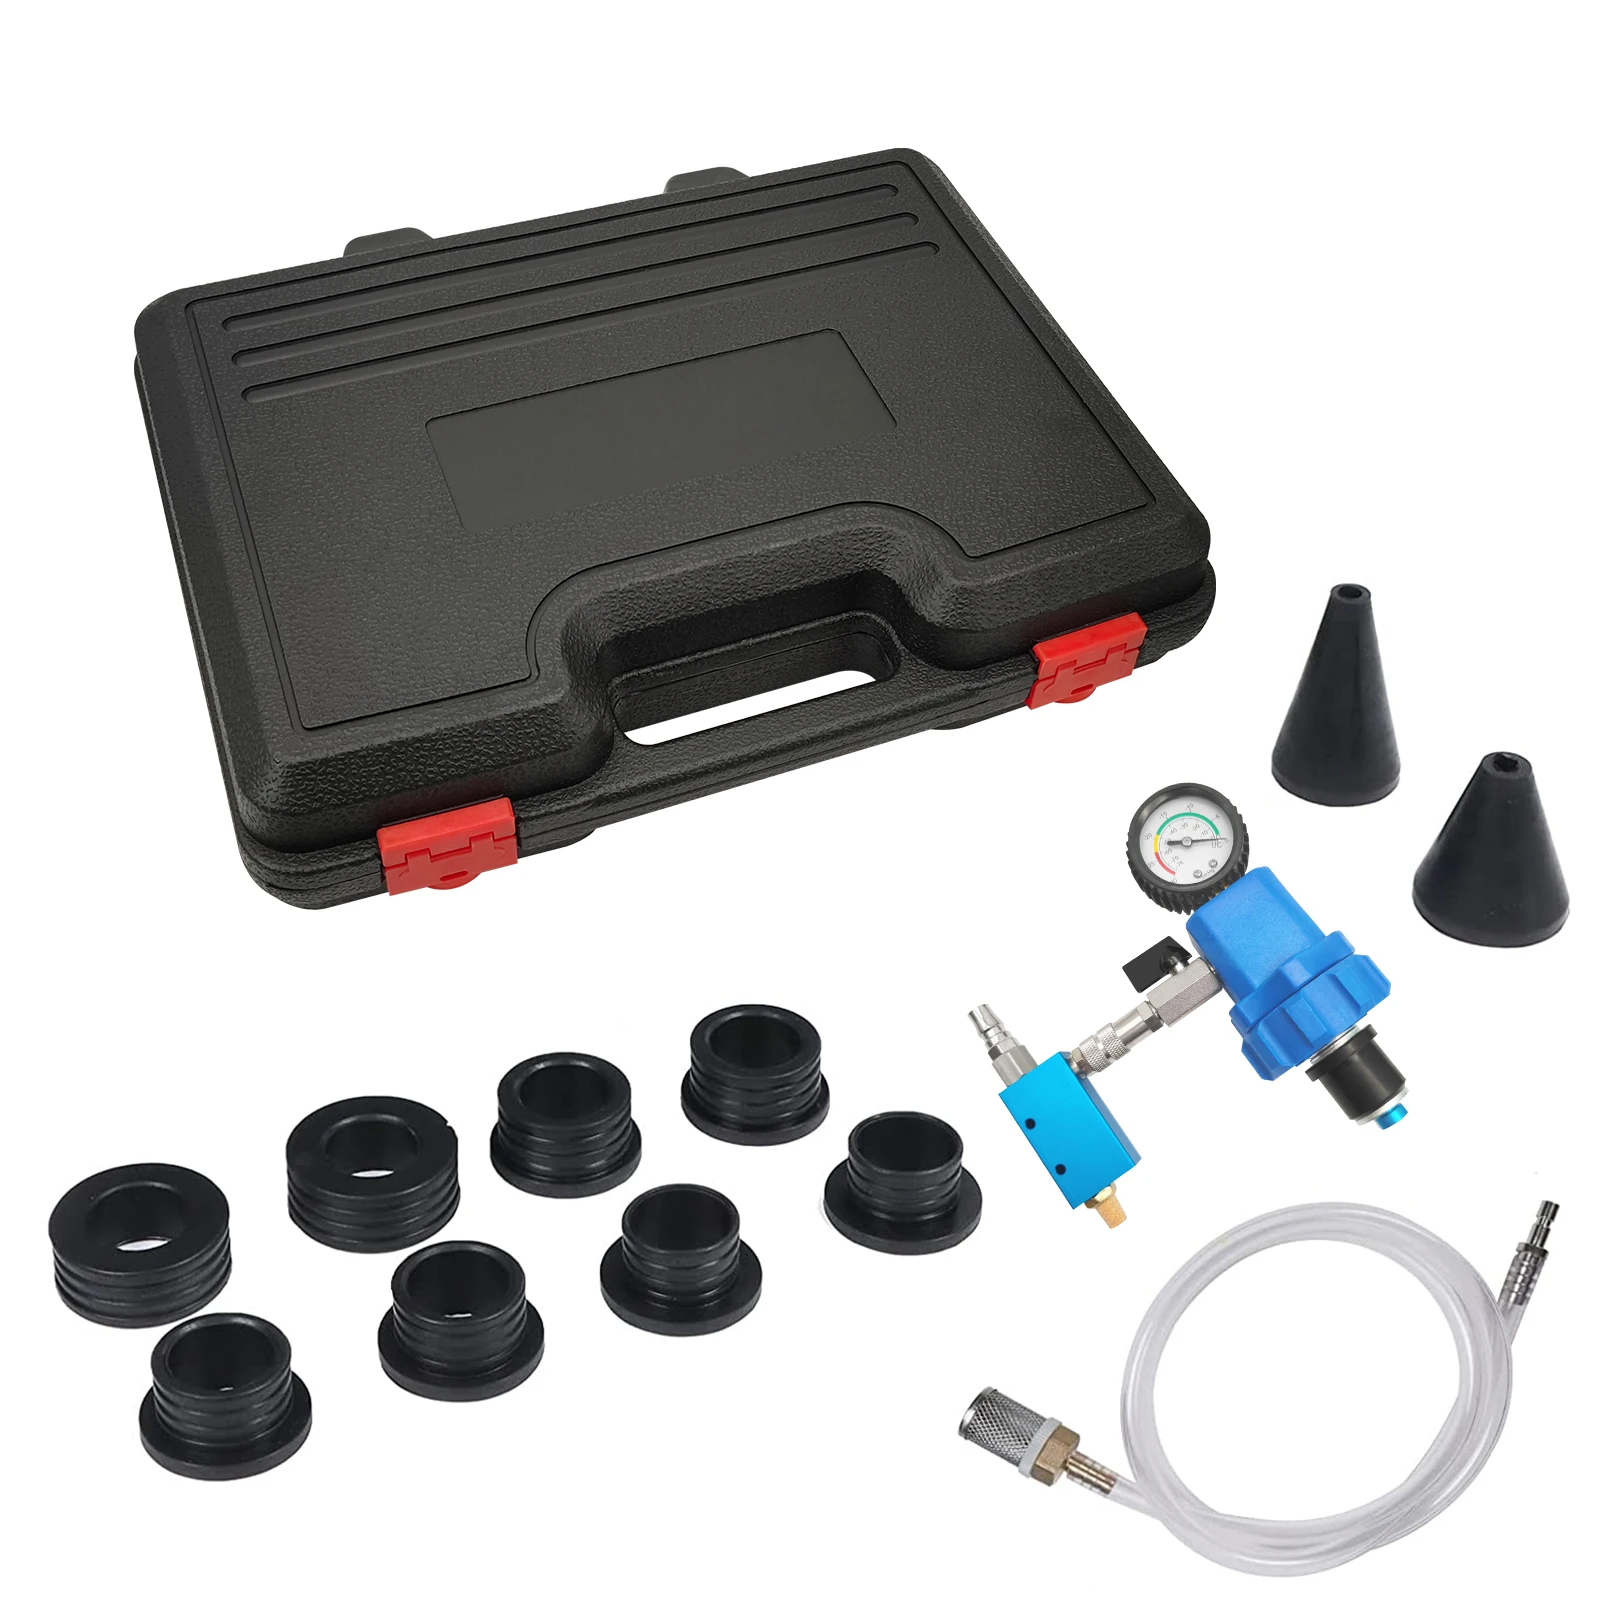 

Coolant Vacuum Refill Kit with Tapered Rubber Adapters Cooling System Vacuum Purge Refill Kit with 8 Replaceable Adapter Sleeves